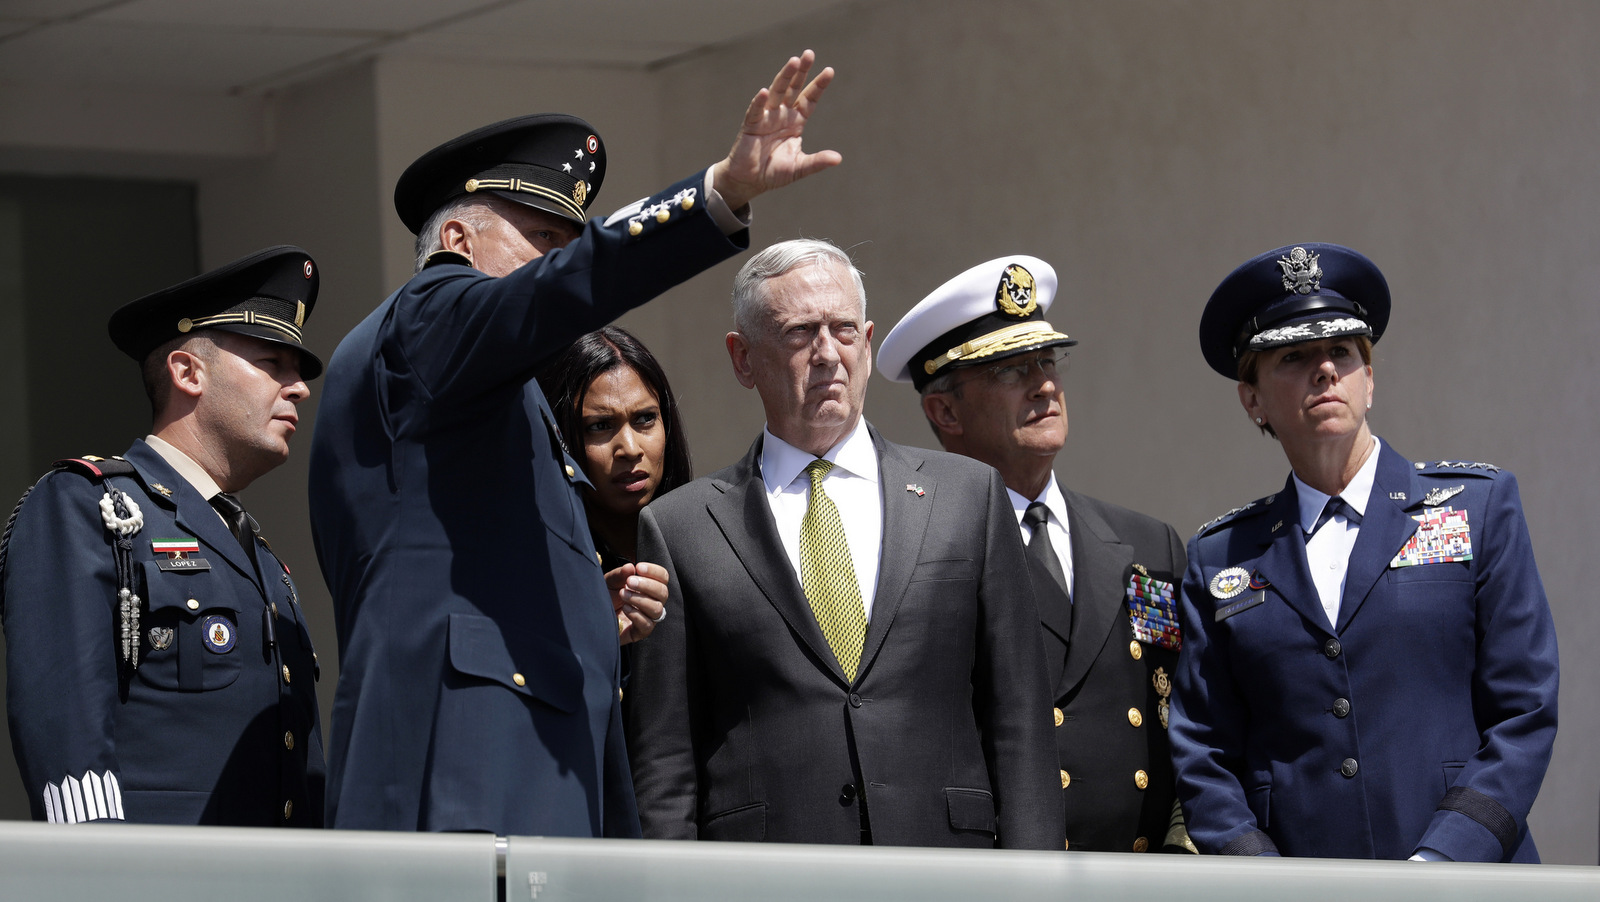 Mexico's Defense Secretary Gen. Salvador Cienfuegos Zepeda gestures as U.S. Defense Secretary Jim Mattis, center, listens during a reception ceremony in Mexico City, Sept. 15, 2017. Mattis was meeting with senior Mexican government officials in the capital on the eve of Mexico's national Independence Day. (AP/Rebecca Blackwell)